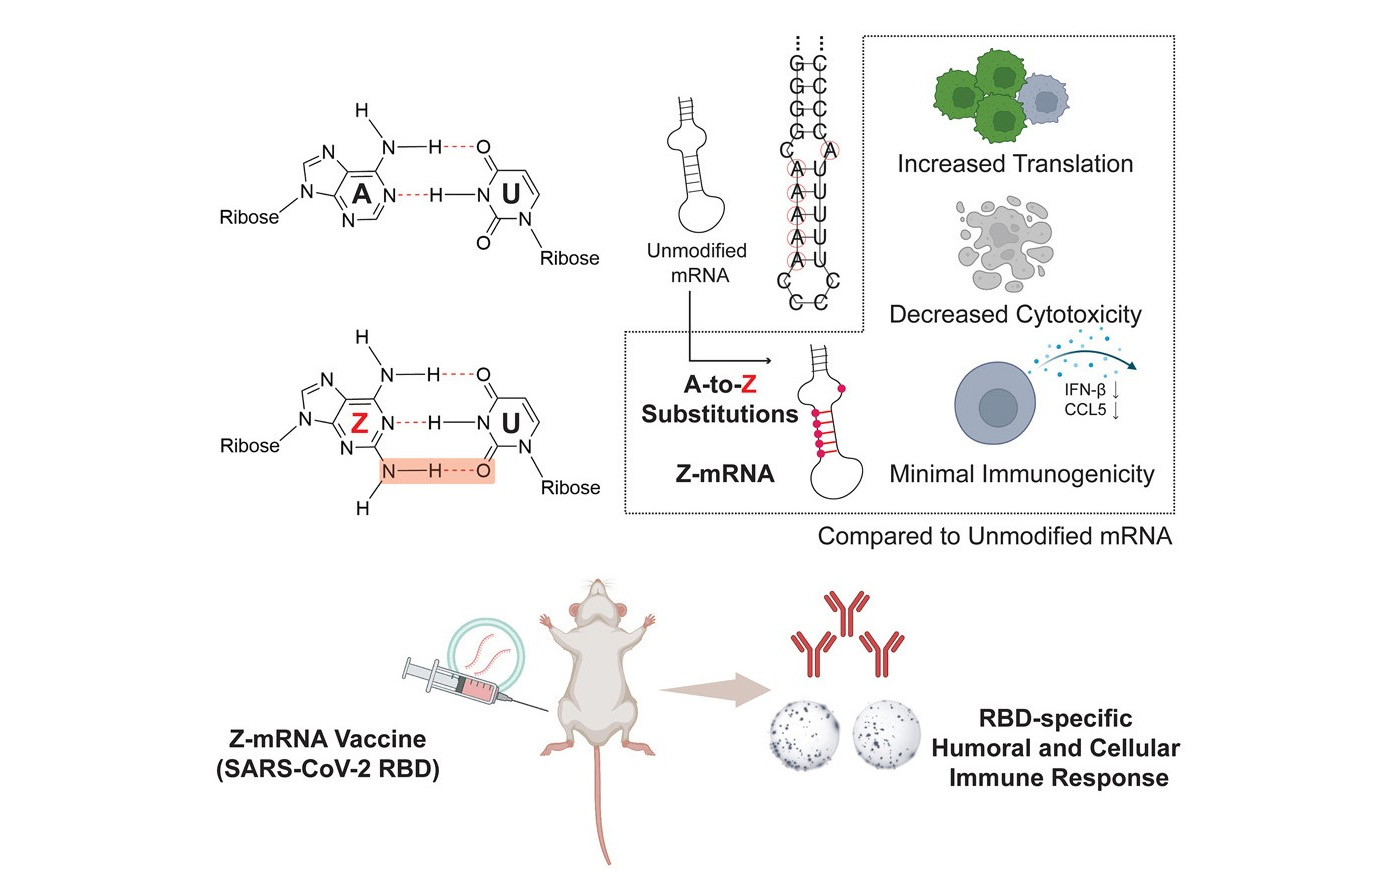 Graphical abstract representing the research: base Z replaces base A in mRNA. The A-to-Z substitution leads to increased translation, decreased cytotoxicity and minimal immunogenicity compared to unmodified mRNA. Base Z-mRNA was used to create a COVID-19 vaccine, tested in mice.